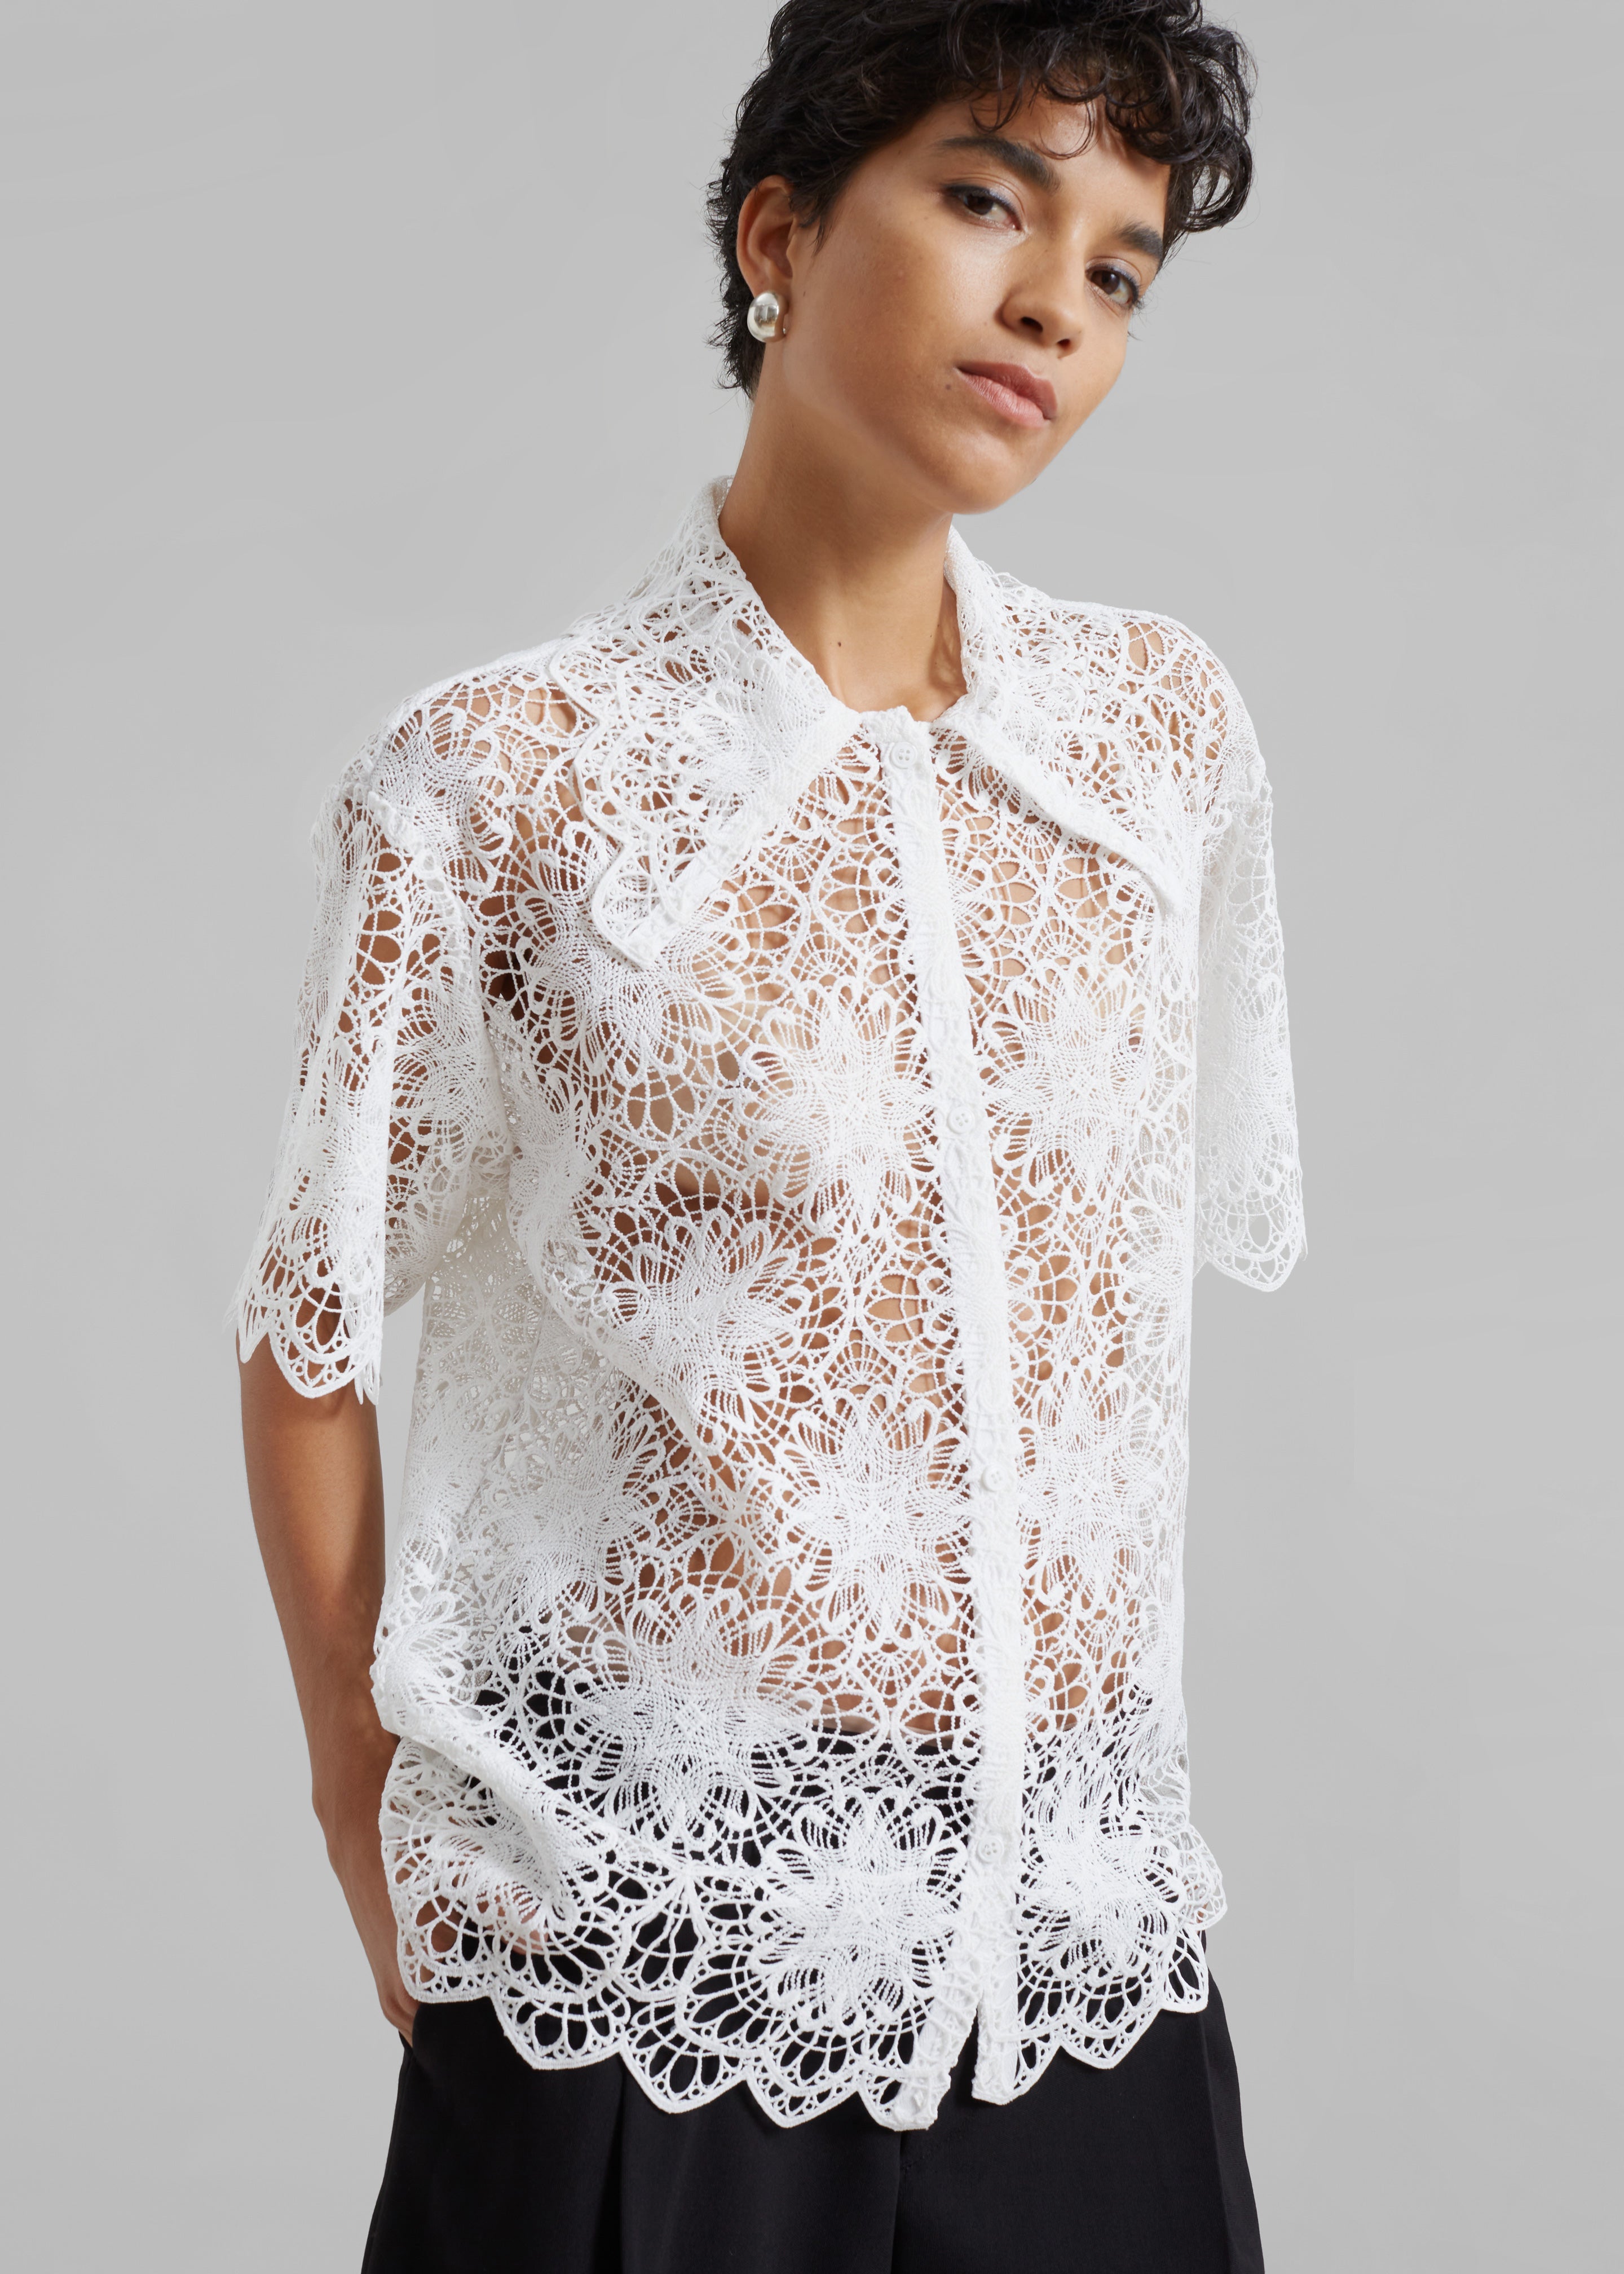 Beaufille Matisse Blouse - Ivory - 6